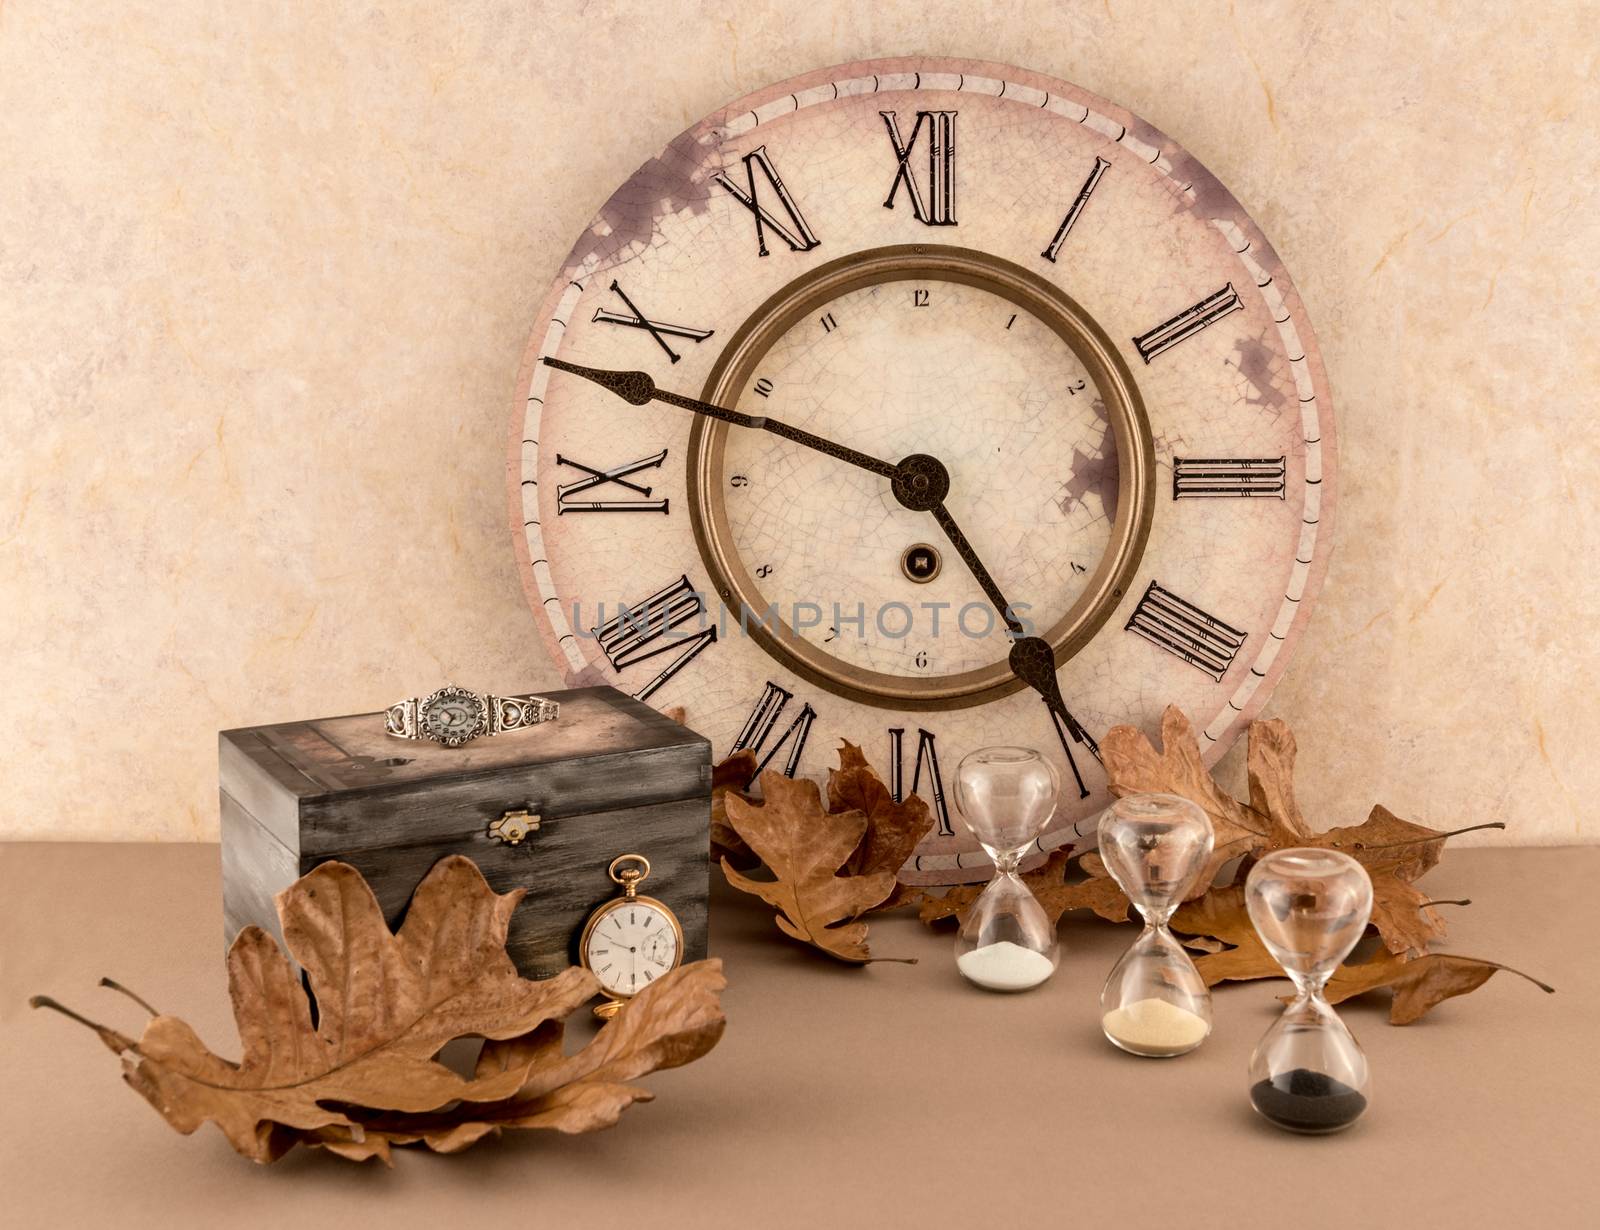 Wall Clock, Hourglass, Wristwatch, Pocketwatch, and Autumn Leaves by krisblackphotography